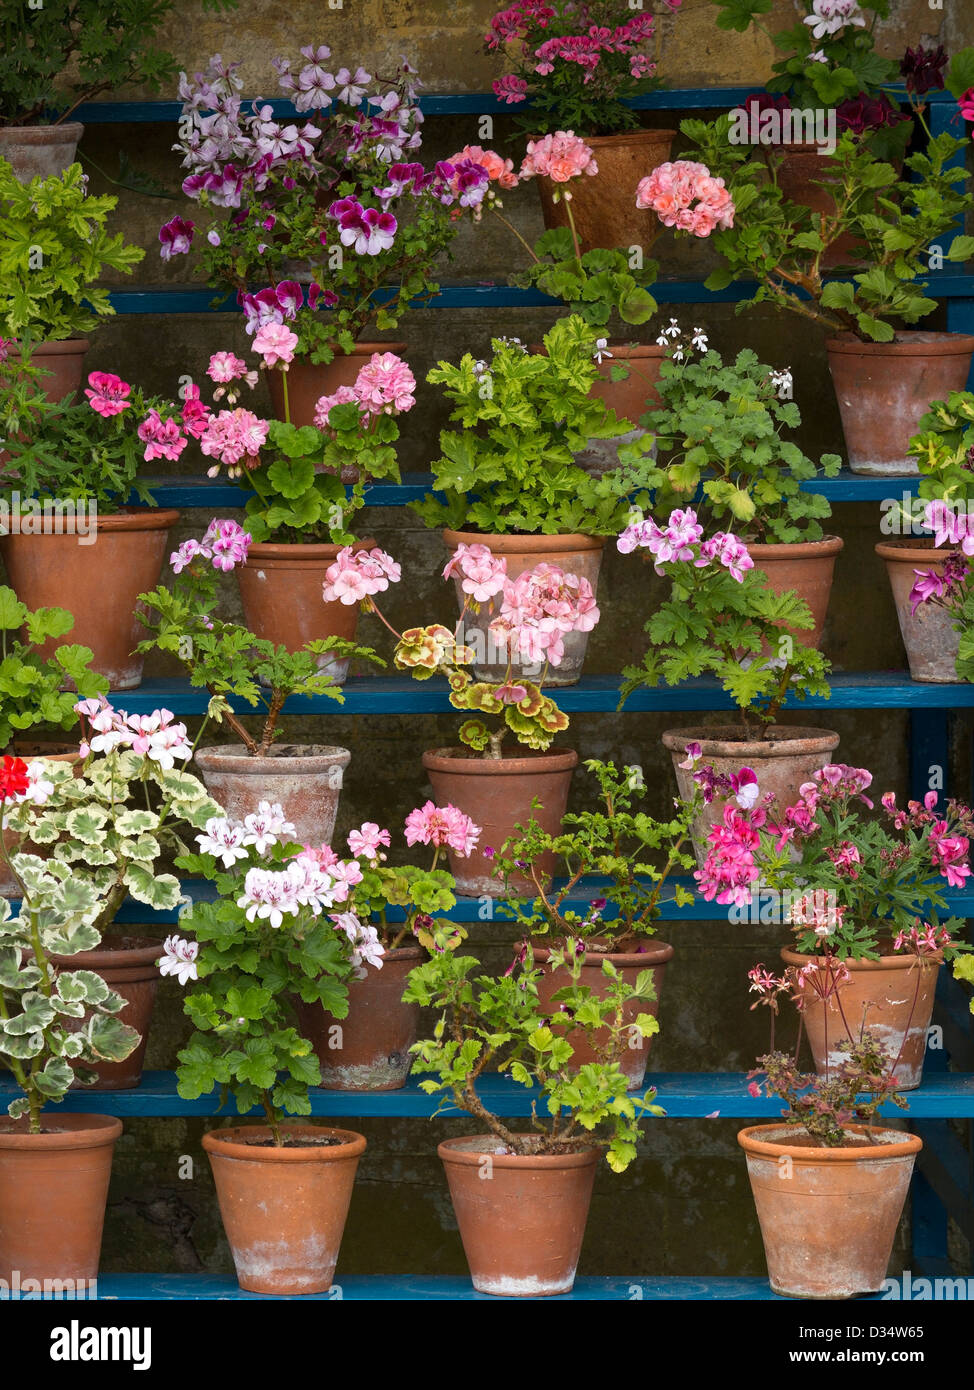 Auricula theatre full of flowering plants in pots, Ticknall, Derbyshire, England, UK Stock Photo